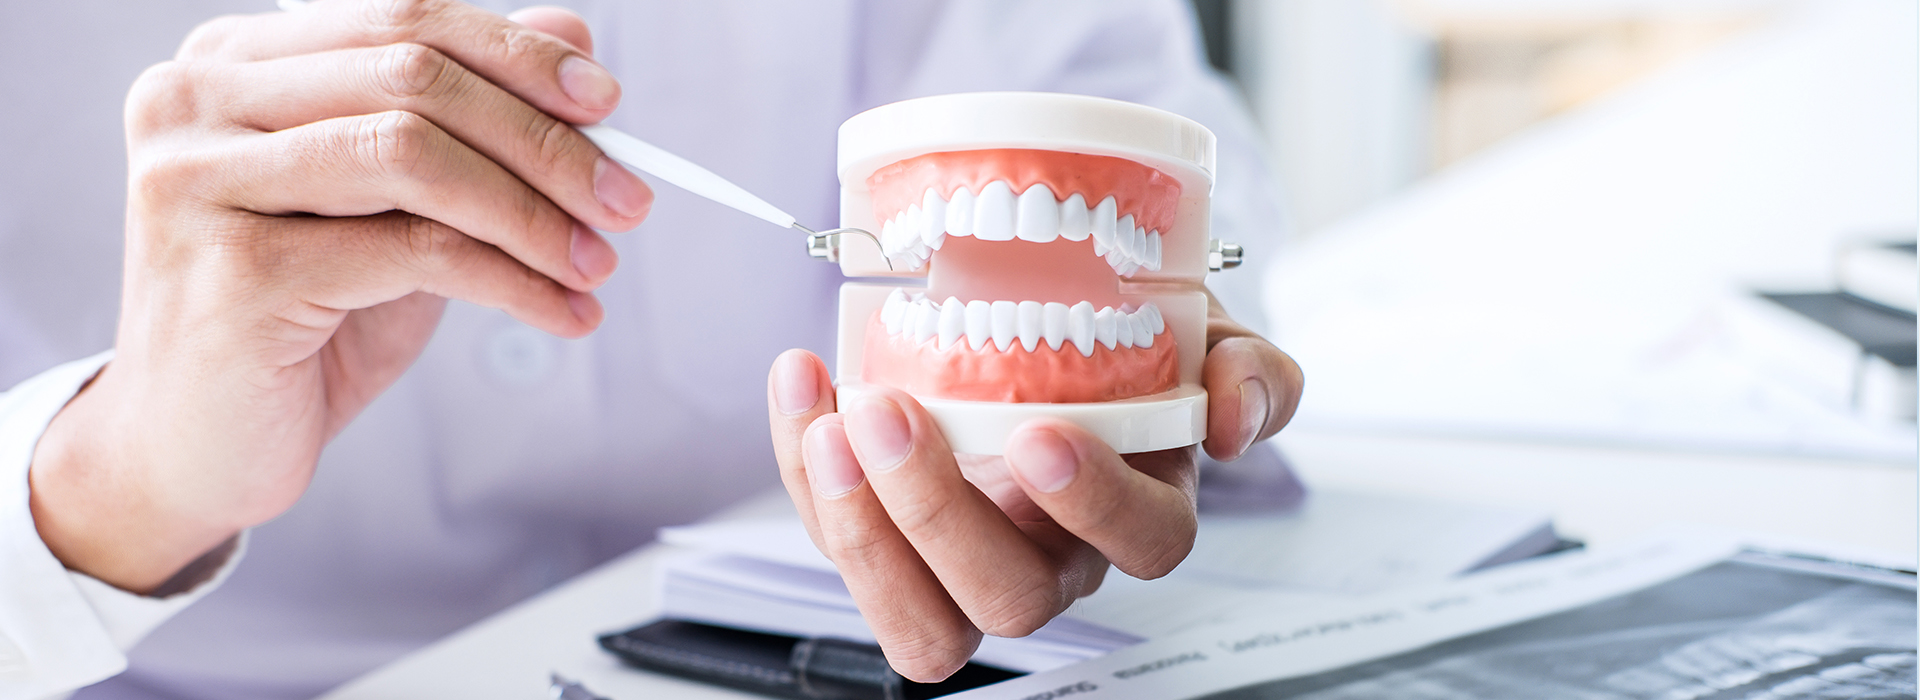 Lodi Family Dentistry | Sedation Dentistry, Extractions and Oral Cancer Screening